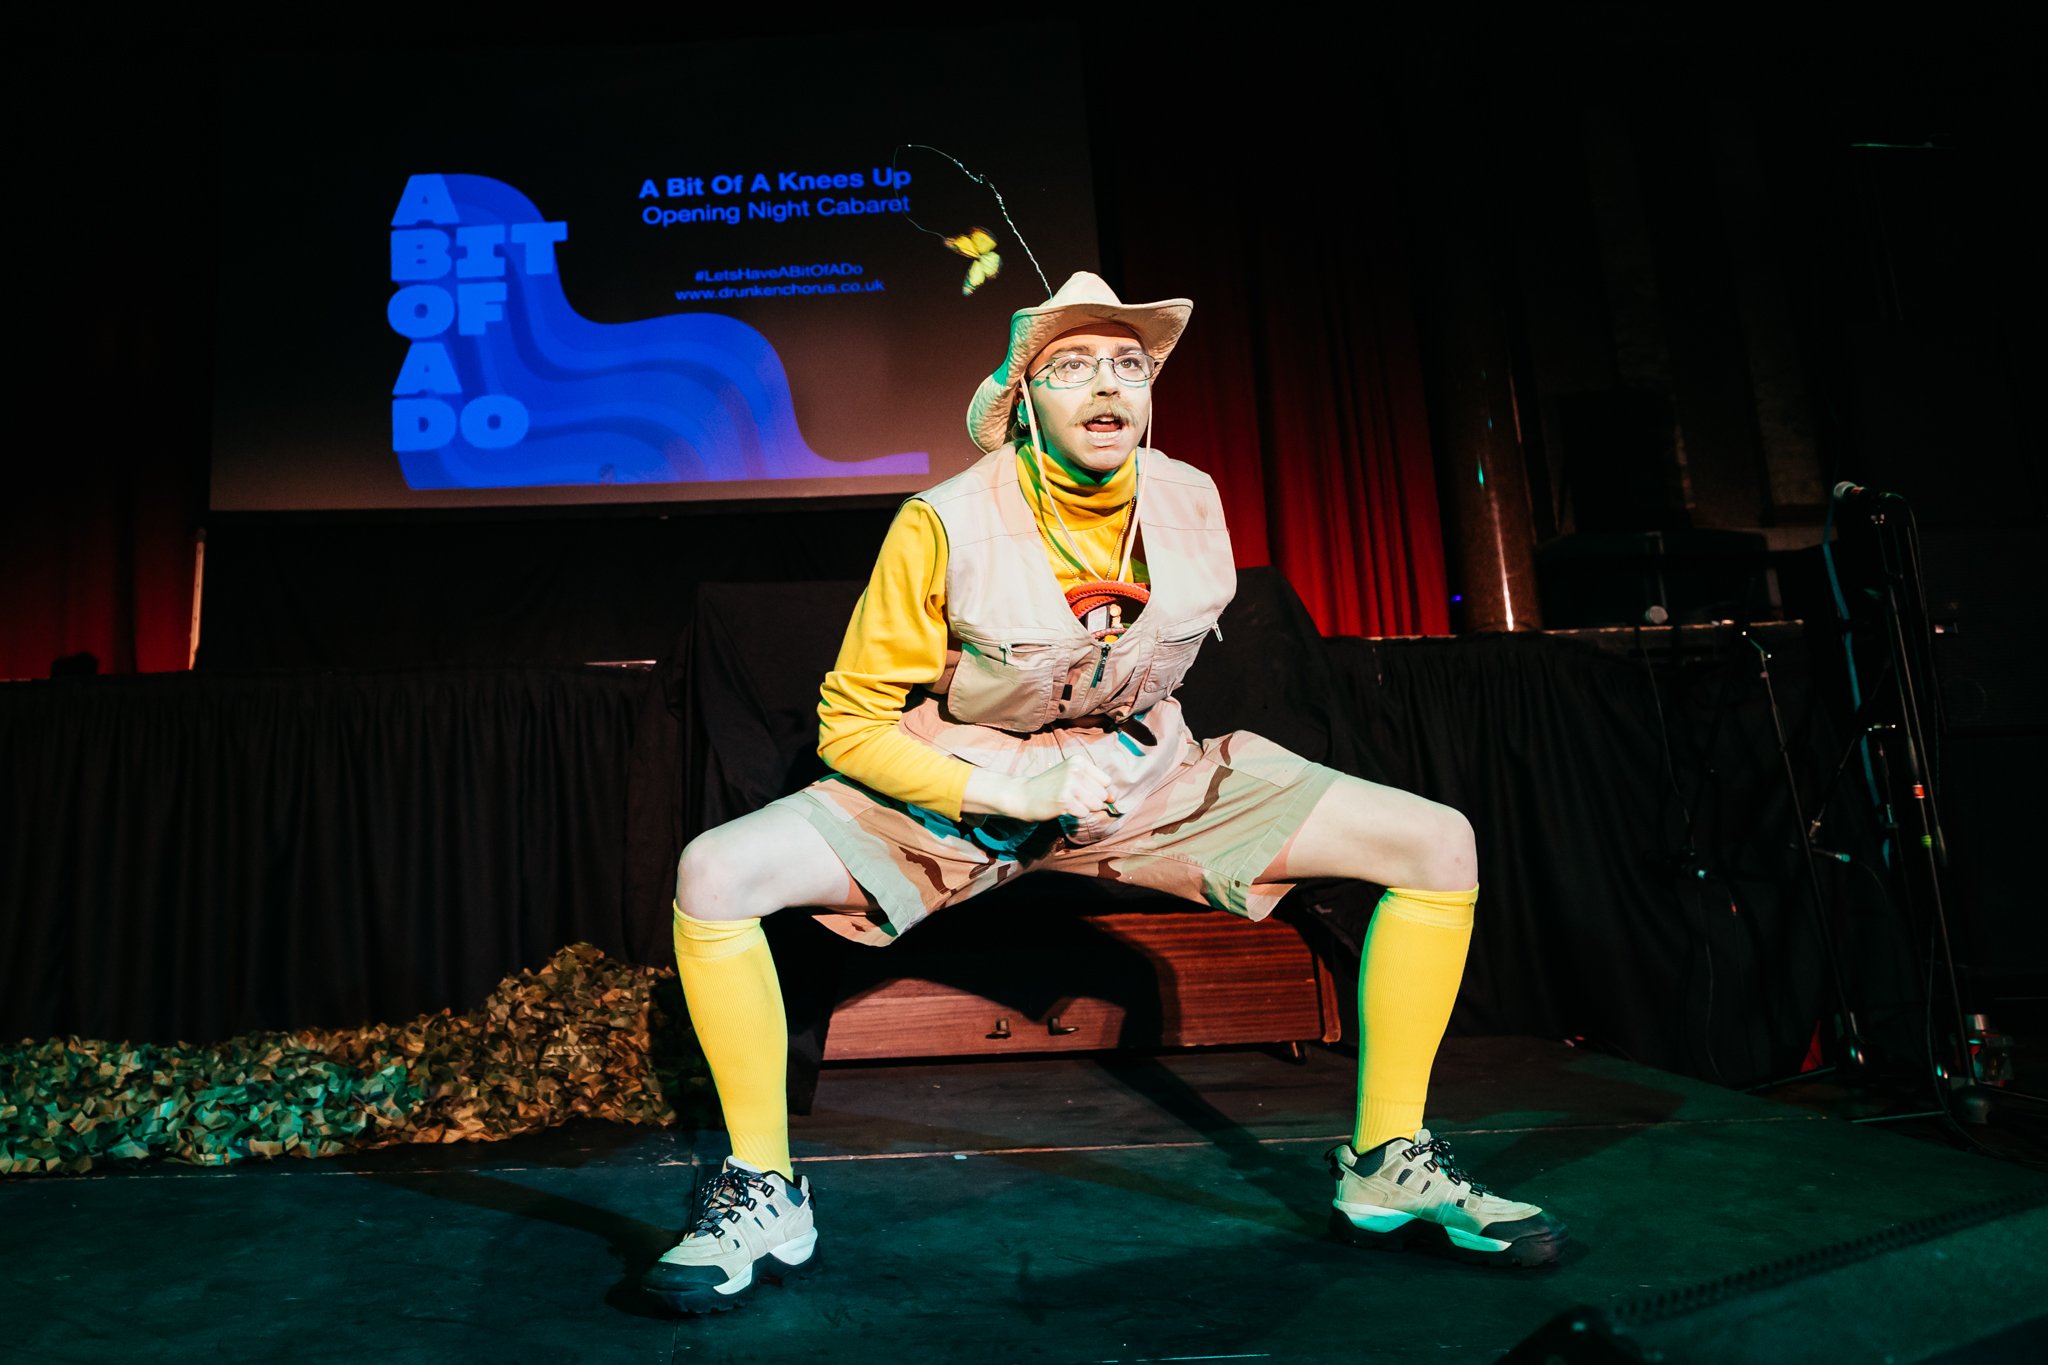  Frank, a Drag King is wearing a yellow t-shirt and knee high socks and a khaki waistcoat, shorts and explorer hat. He performs a very deep squat – he is very flexible! 